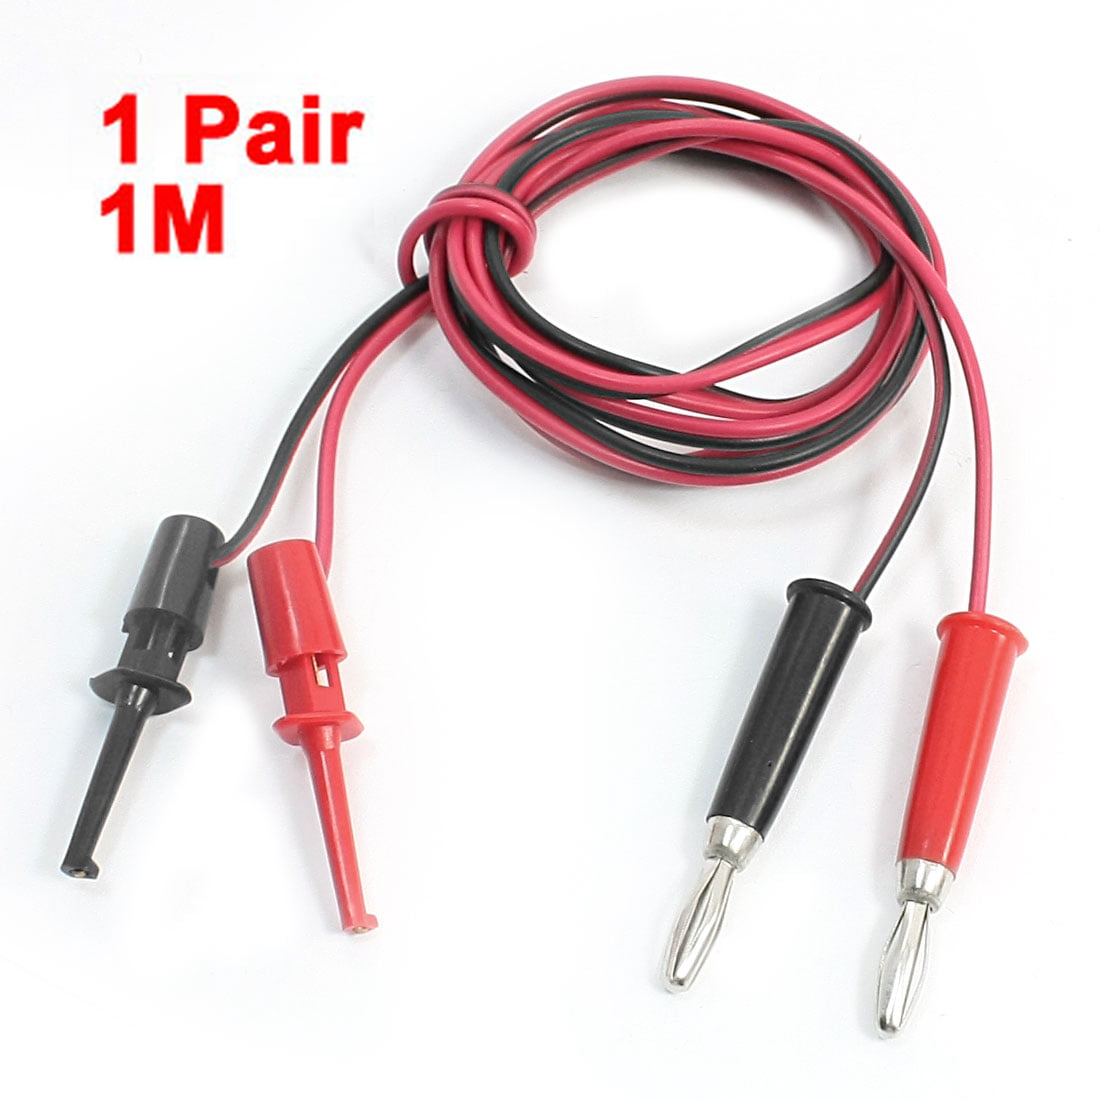 1Pair 4mm Test Hook Clip to Straight Banana Plug Connector Lead Cable 1M 3A 